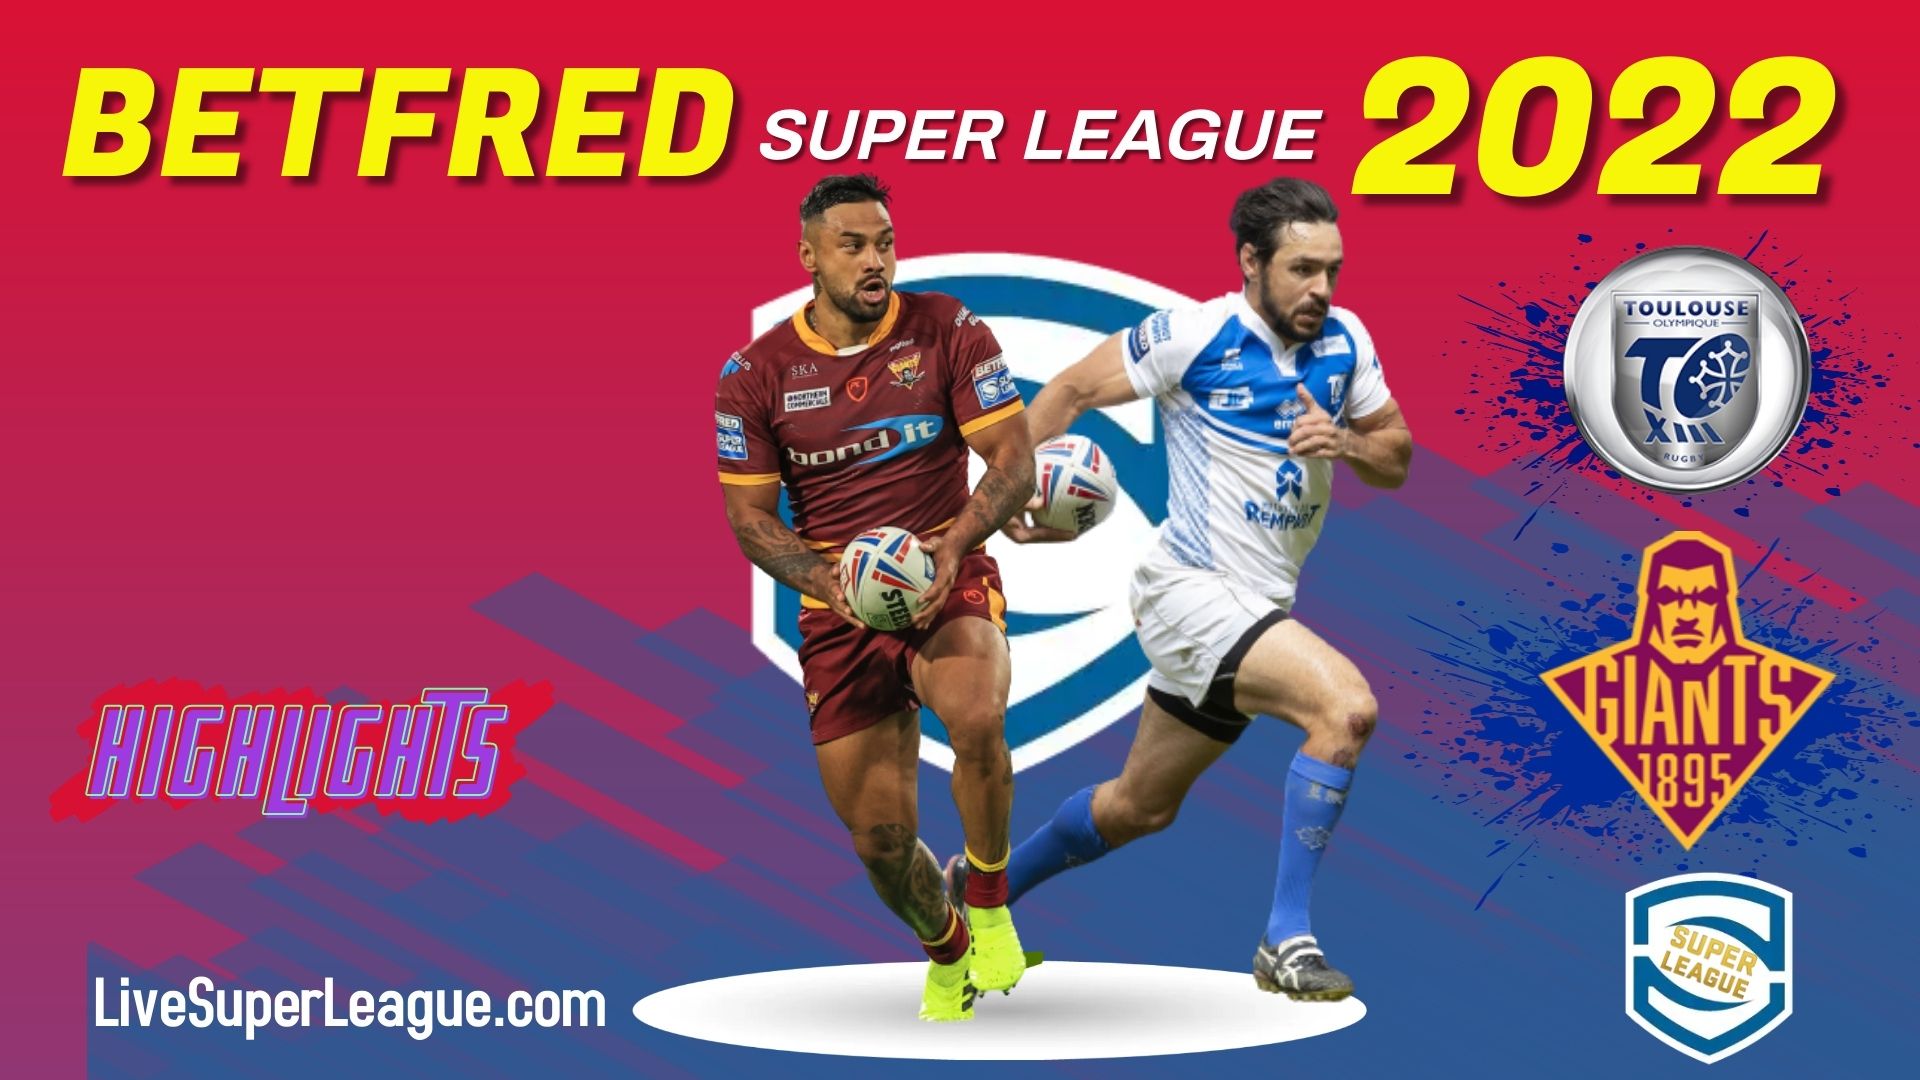 Toulouse Vs Huddersfield Giants Highlights 2022